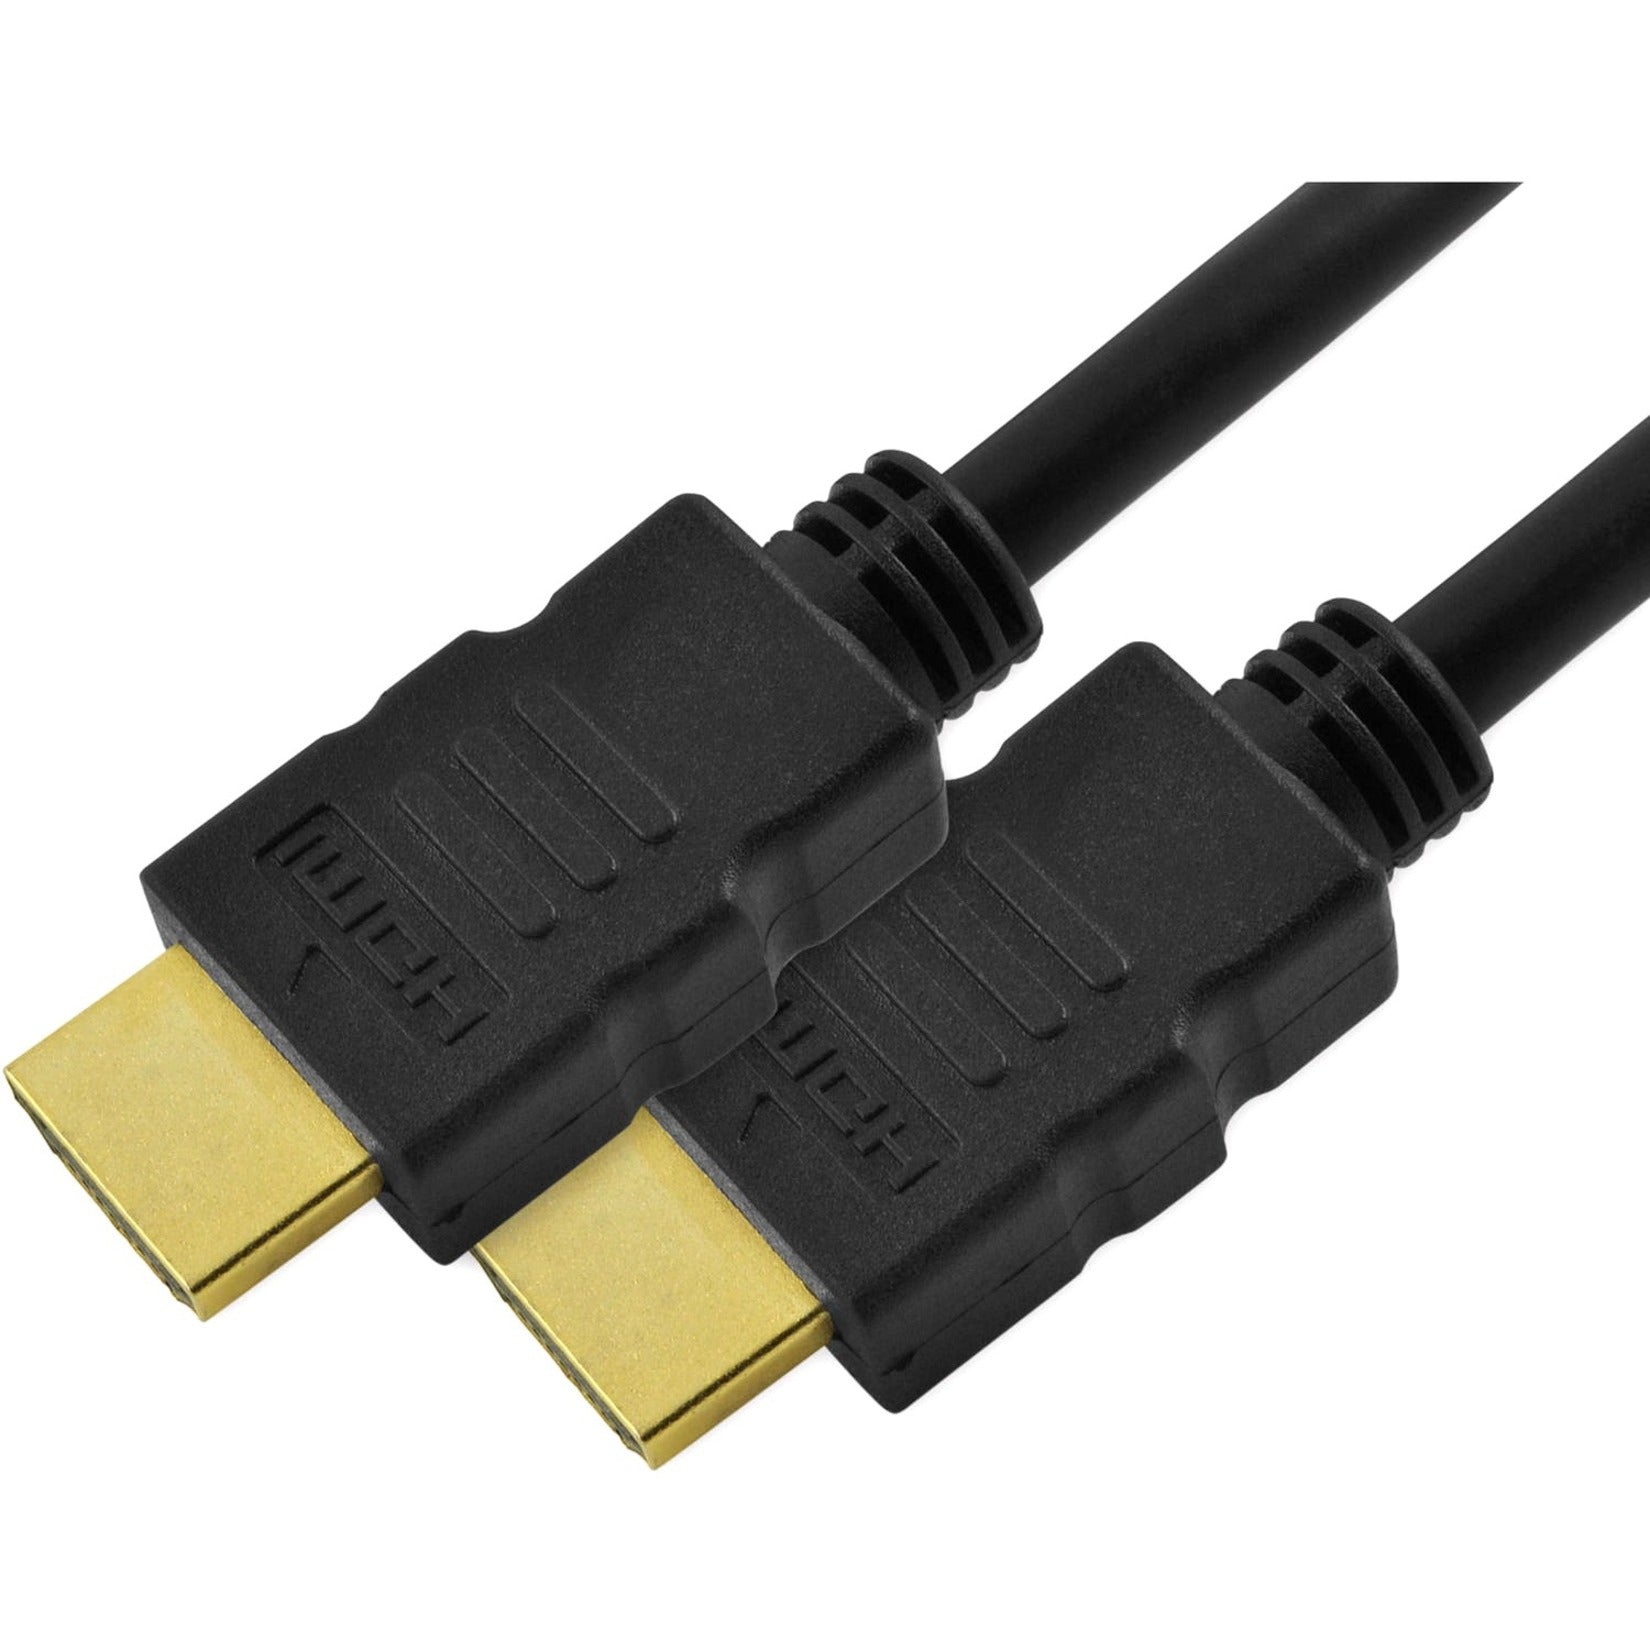 4XEM 4XHDMI4K2KPRO25 25ft Ultra High Speed 4K2K HDMI Cable EMI/RF Protection Gold-plated Connectors Black  4XEM 4XHDMI4K2KPRO25 25ft Ultra haute vitesse Câble HDMI 4K2K Protection EMI/RF Connecteurs plaqués or Noir